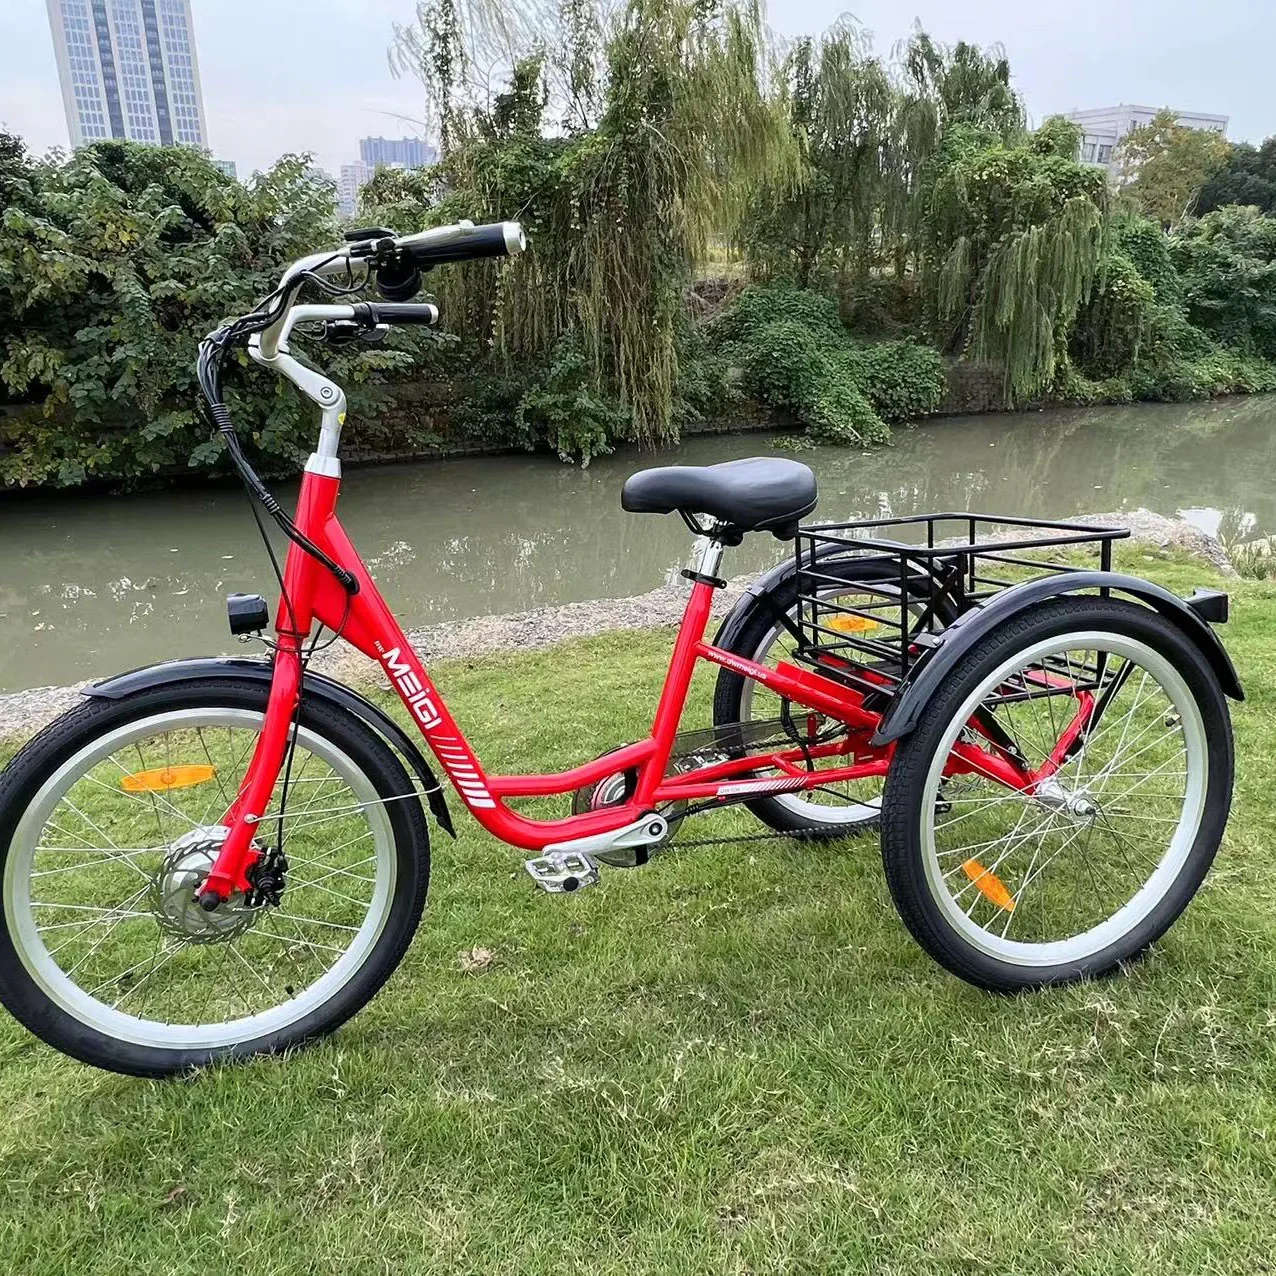 MEIGI Good Quality Urban E Tricycle  350W Motor Cargo Delivery Ebike 3 Wheel Electric Tricycle For Adults custom dyu a5 14 inch 350w brushless motor folding electric bicycle power assist moped ebike 40km range for commuting shopping traveling